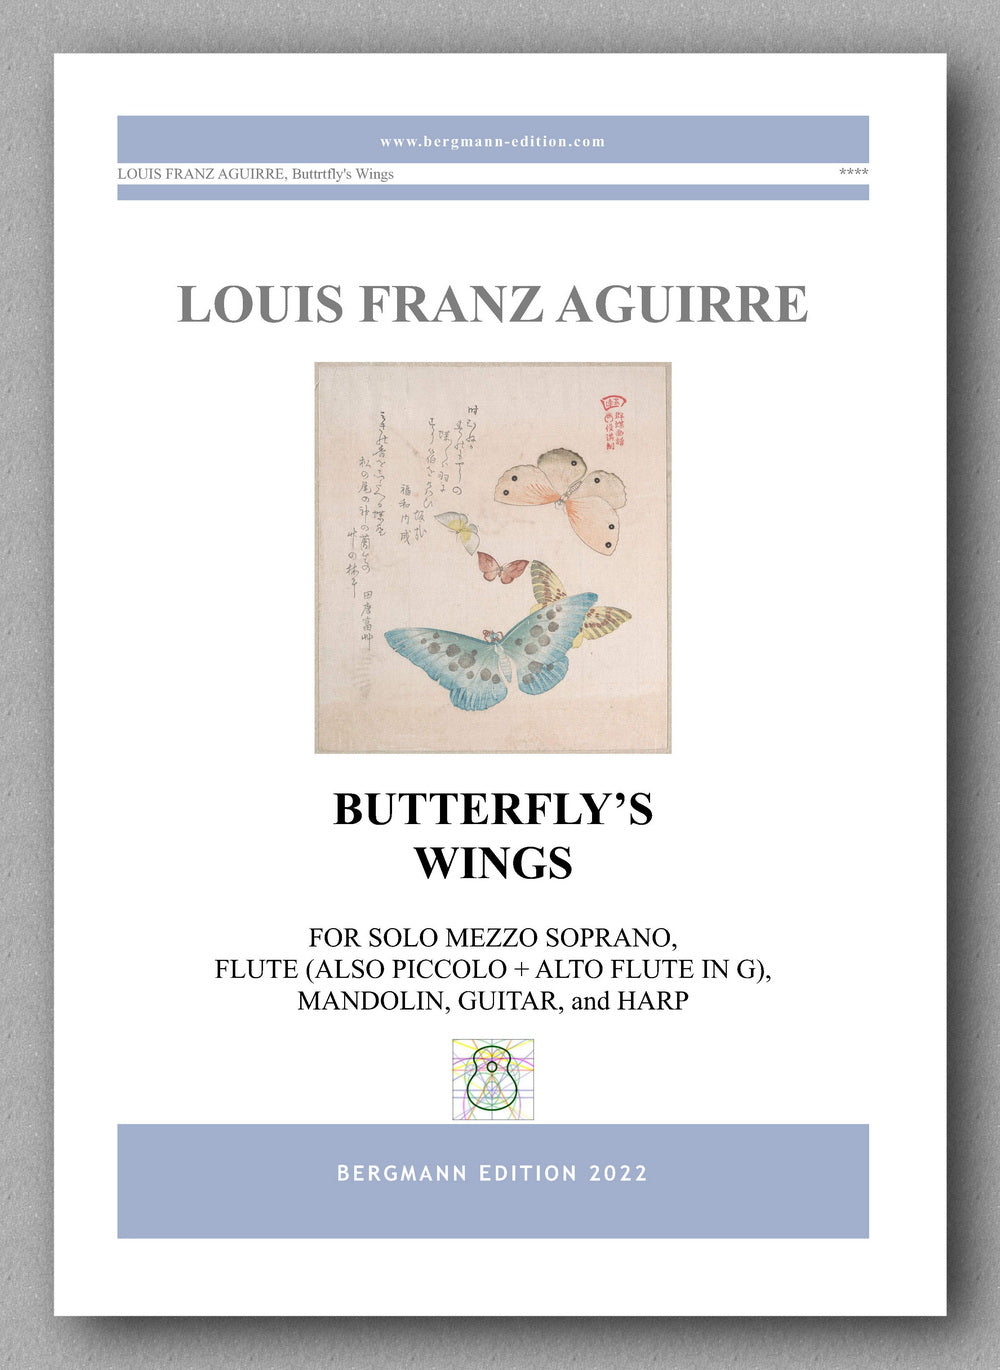 Louis Franz Aguirre, Butterfly's Wings - preview of the cover